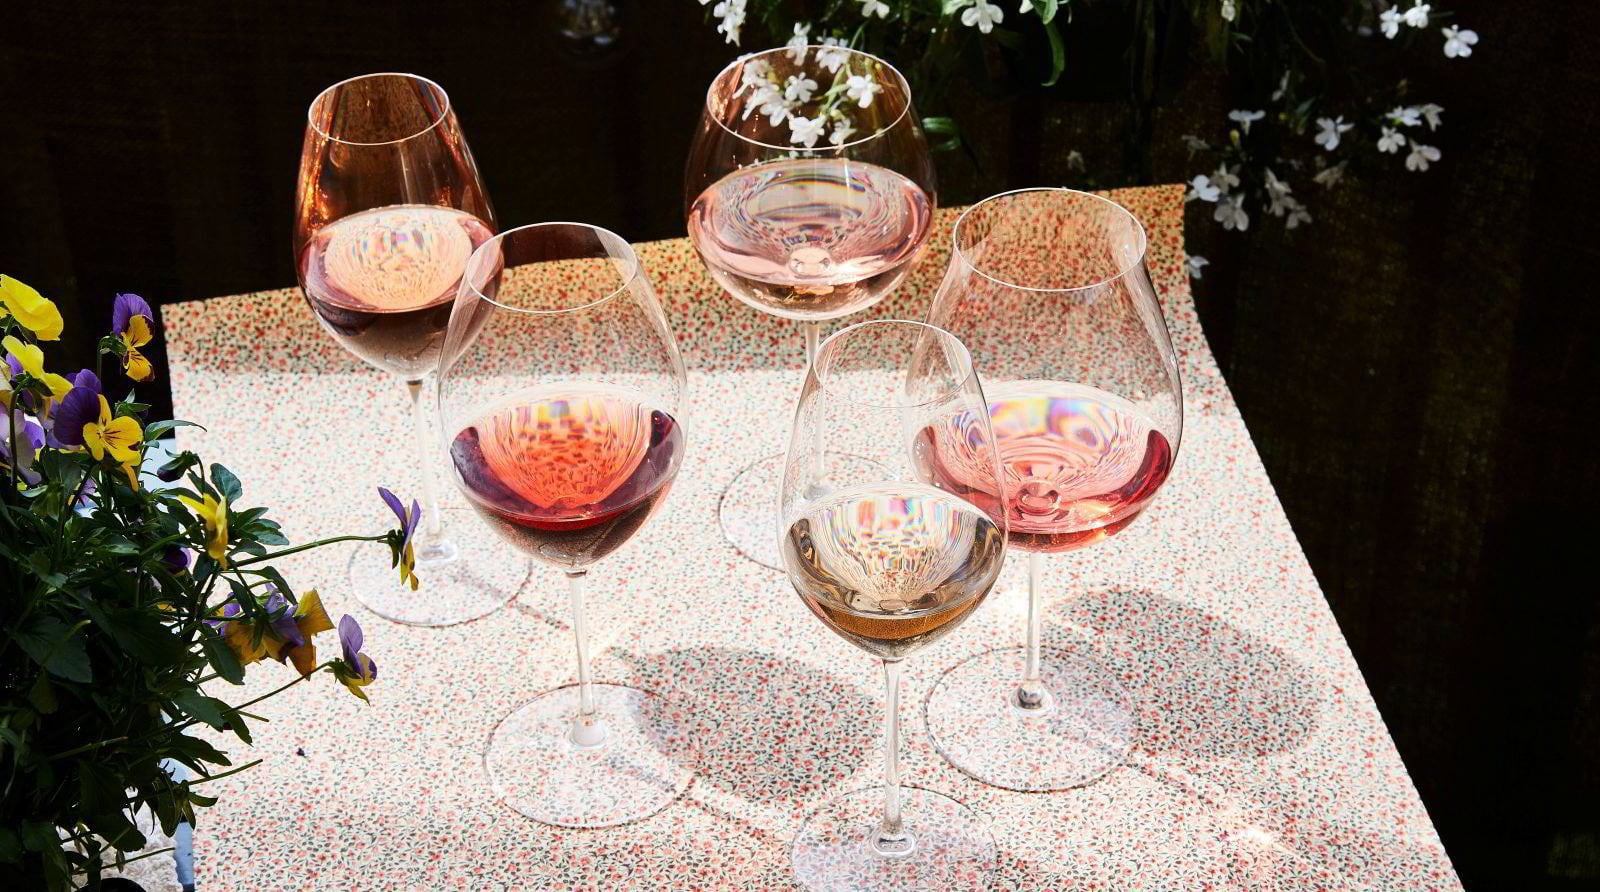 Wine glass, Table, Tableware, Drinkware, Stemware, Dishware, Furniture, Tablecloth, Cup, Textile